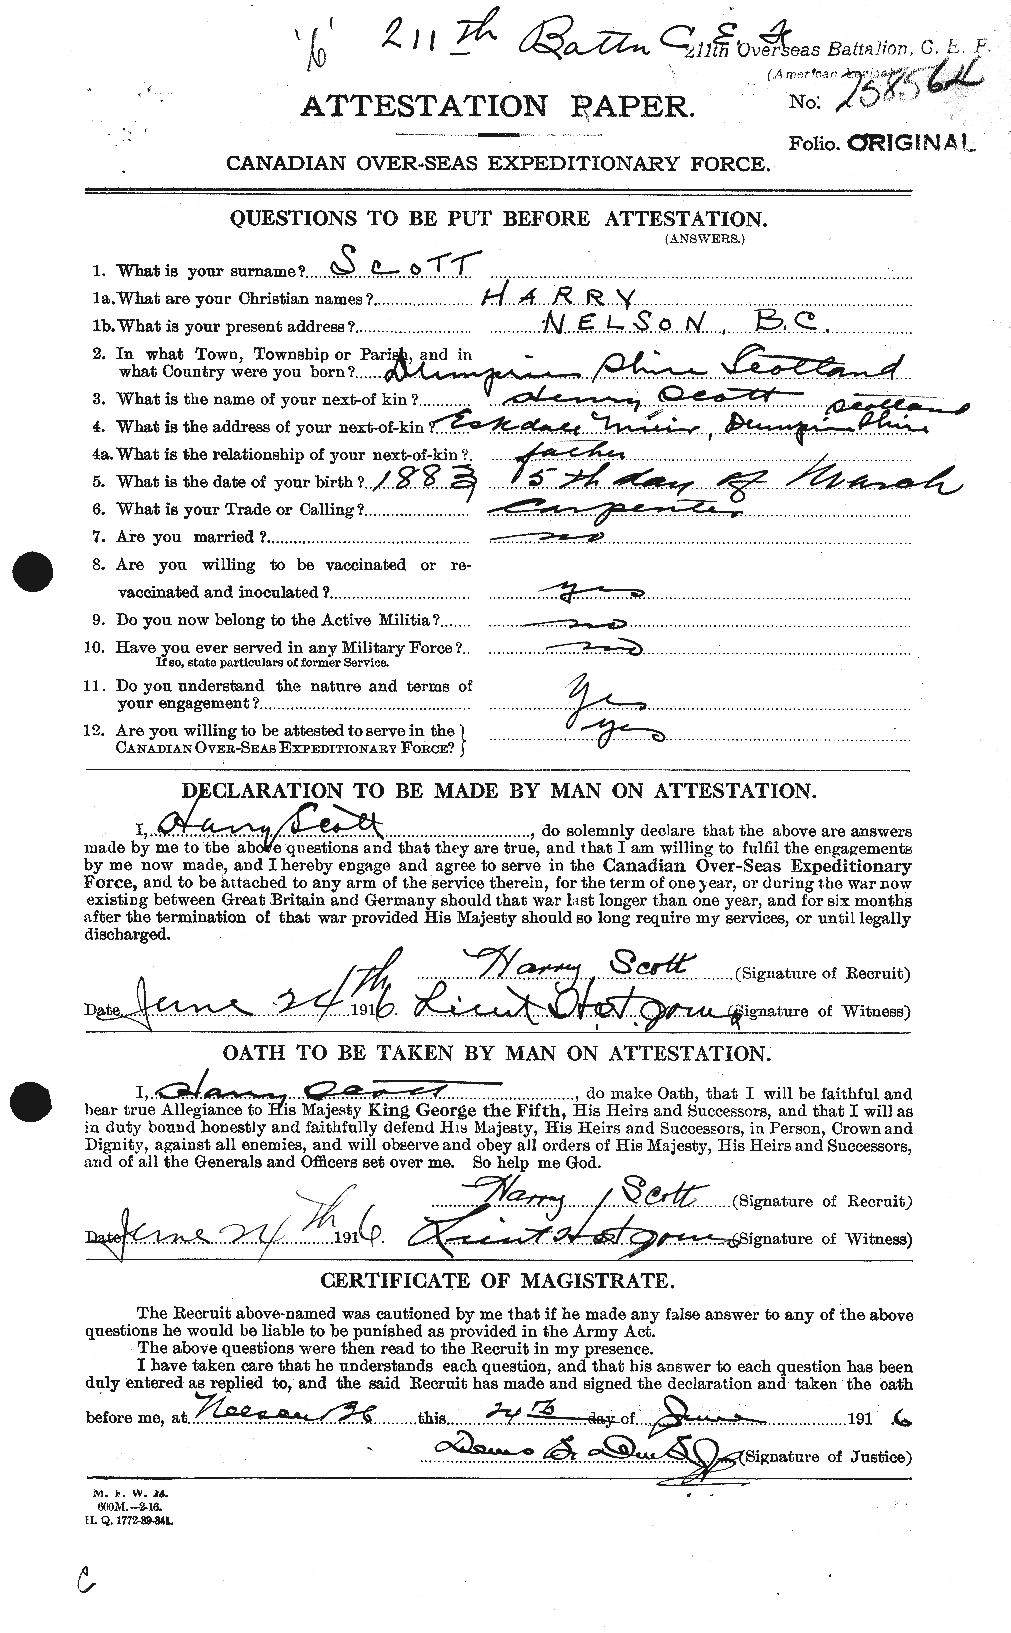 Personnel Records of the First World War - CEF 086326a